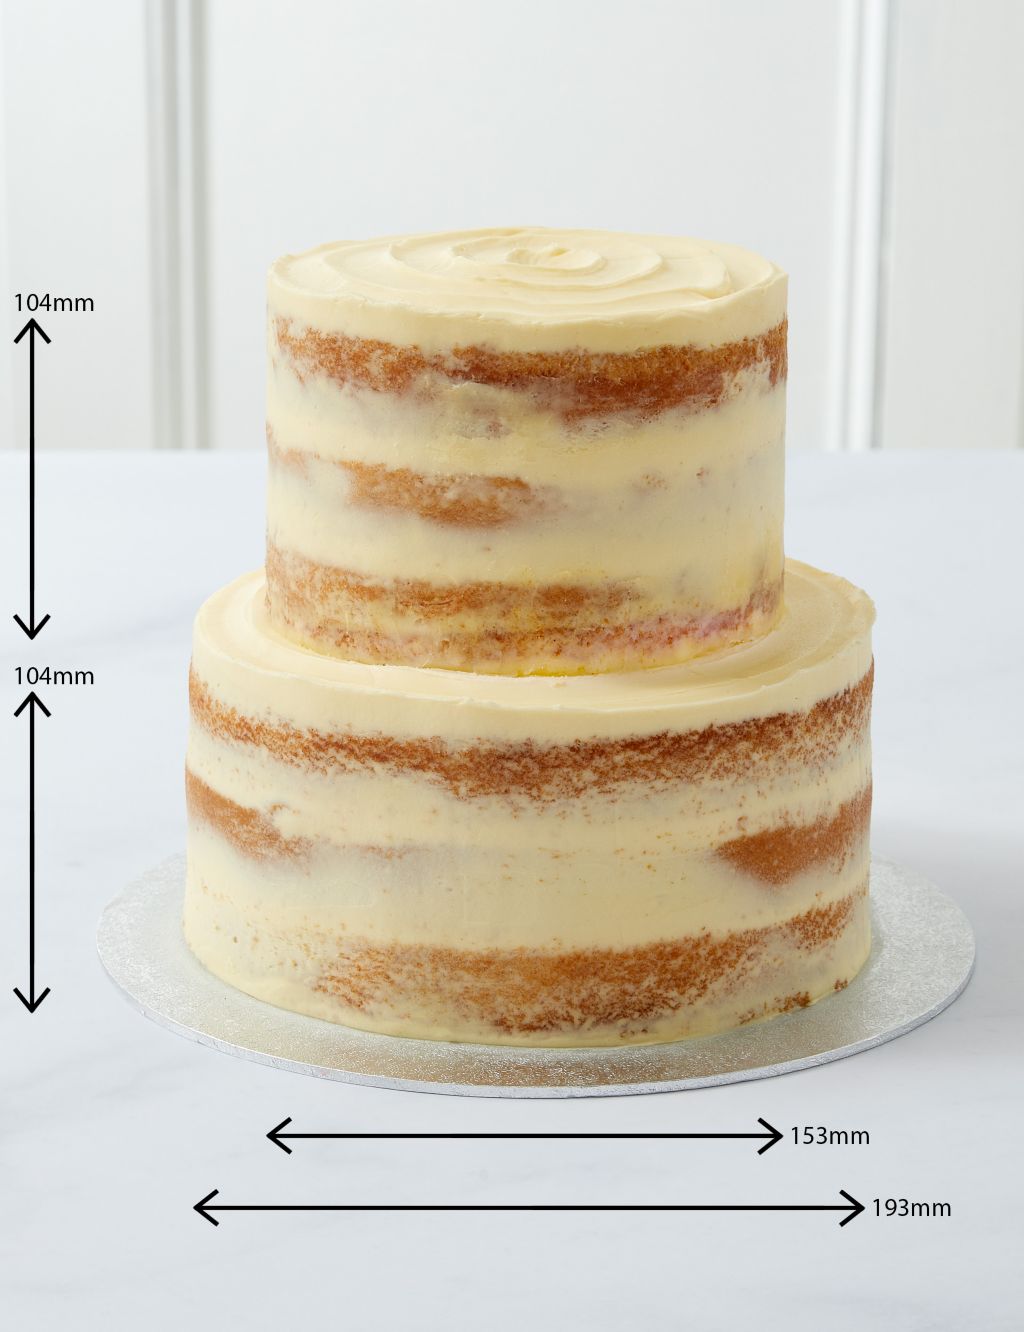 Vanilla Two Tier Naked Cake (Serves 36) 6 of 7